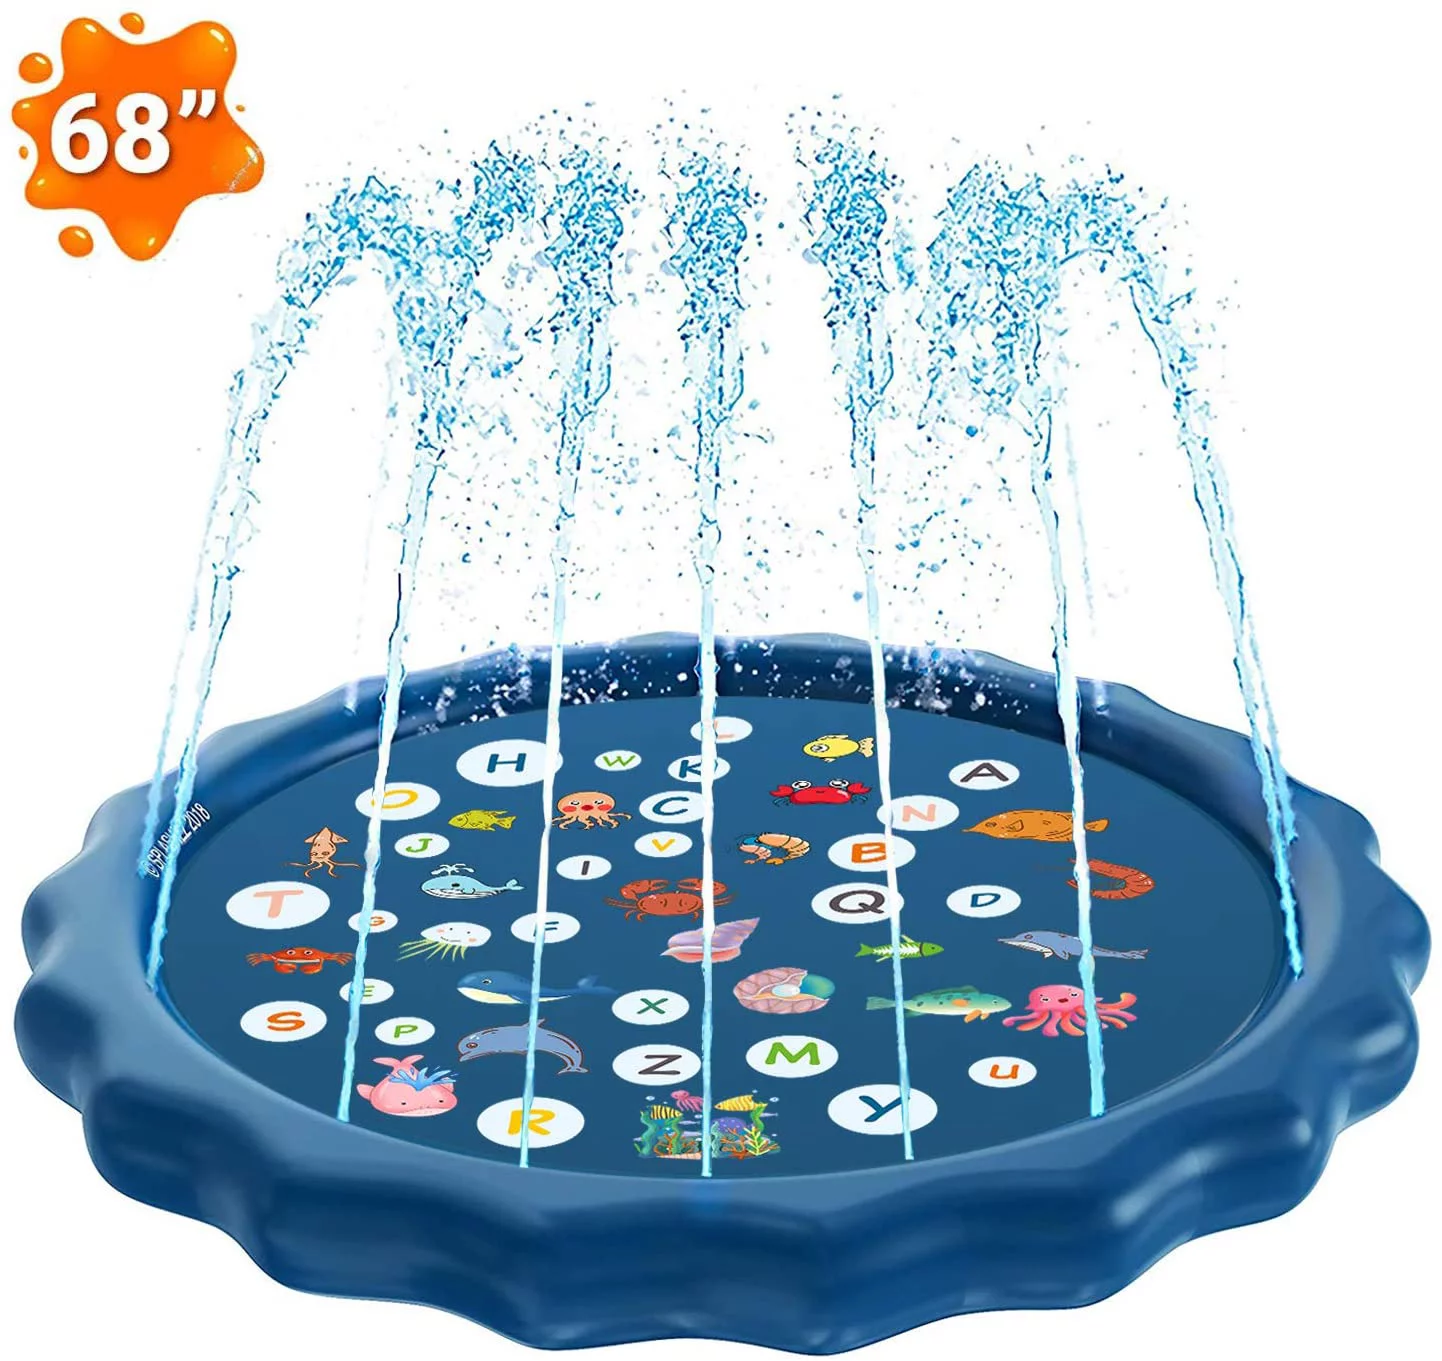 68 Sprinkler for Kids, 3-in-1 Splash Pad, from A to Z Toddler Pool for Wading Swimming and Learning, Inflatable Outdoor Water Toys Fun for 1 2 3 4 5 Year Old Toddlers, Kids, Boys and Girls